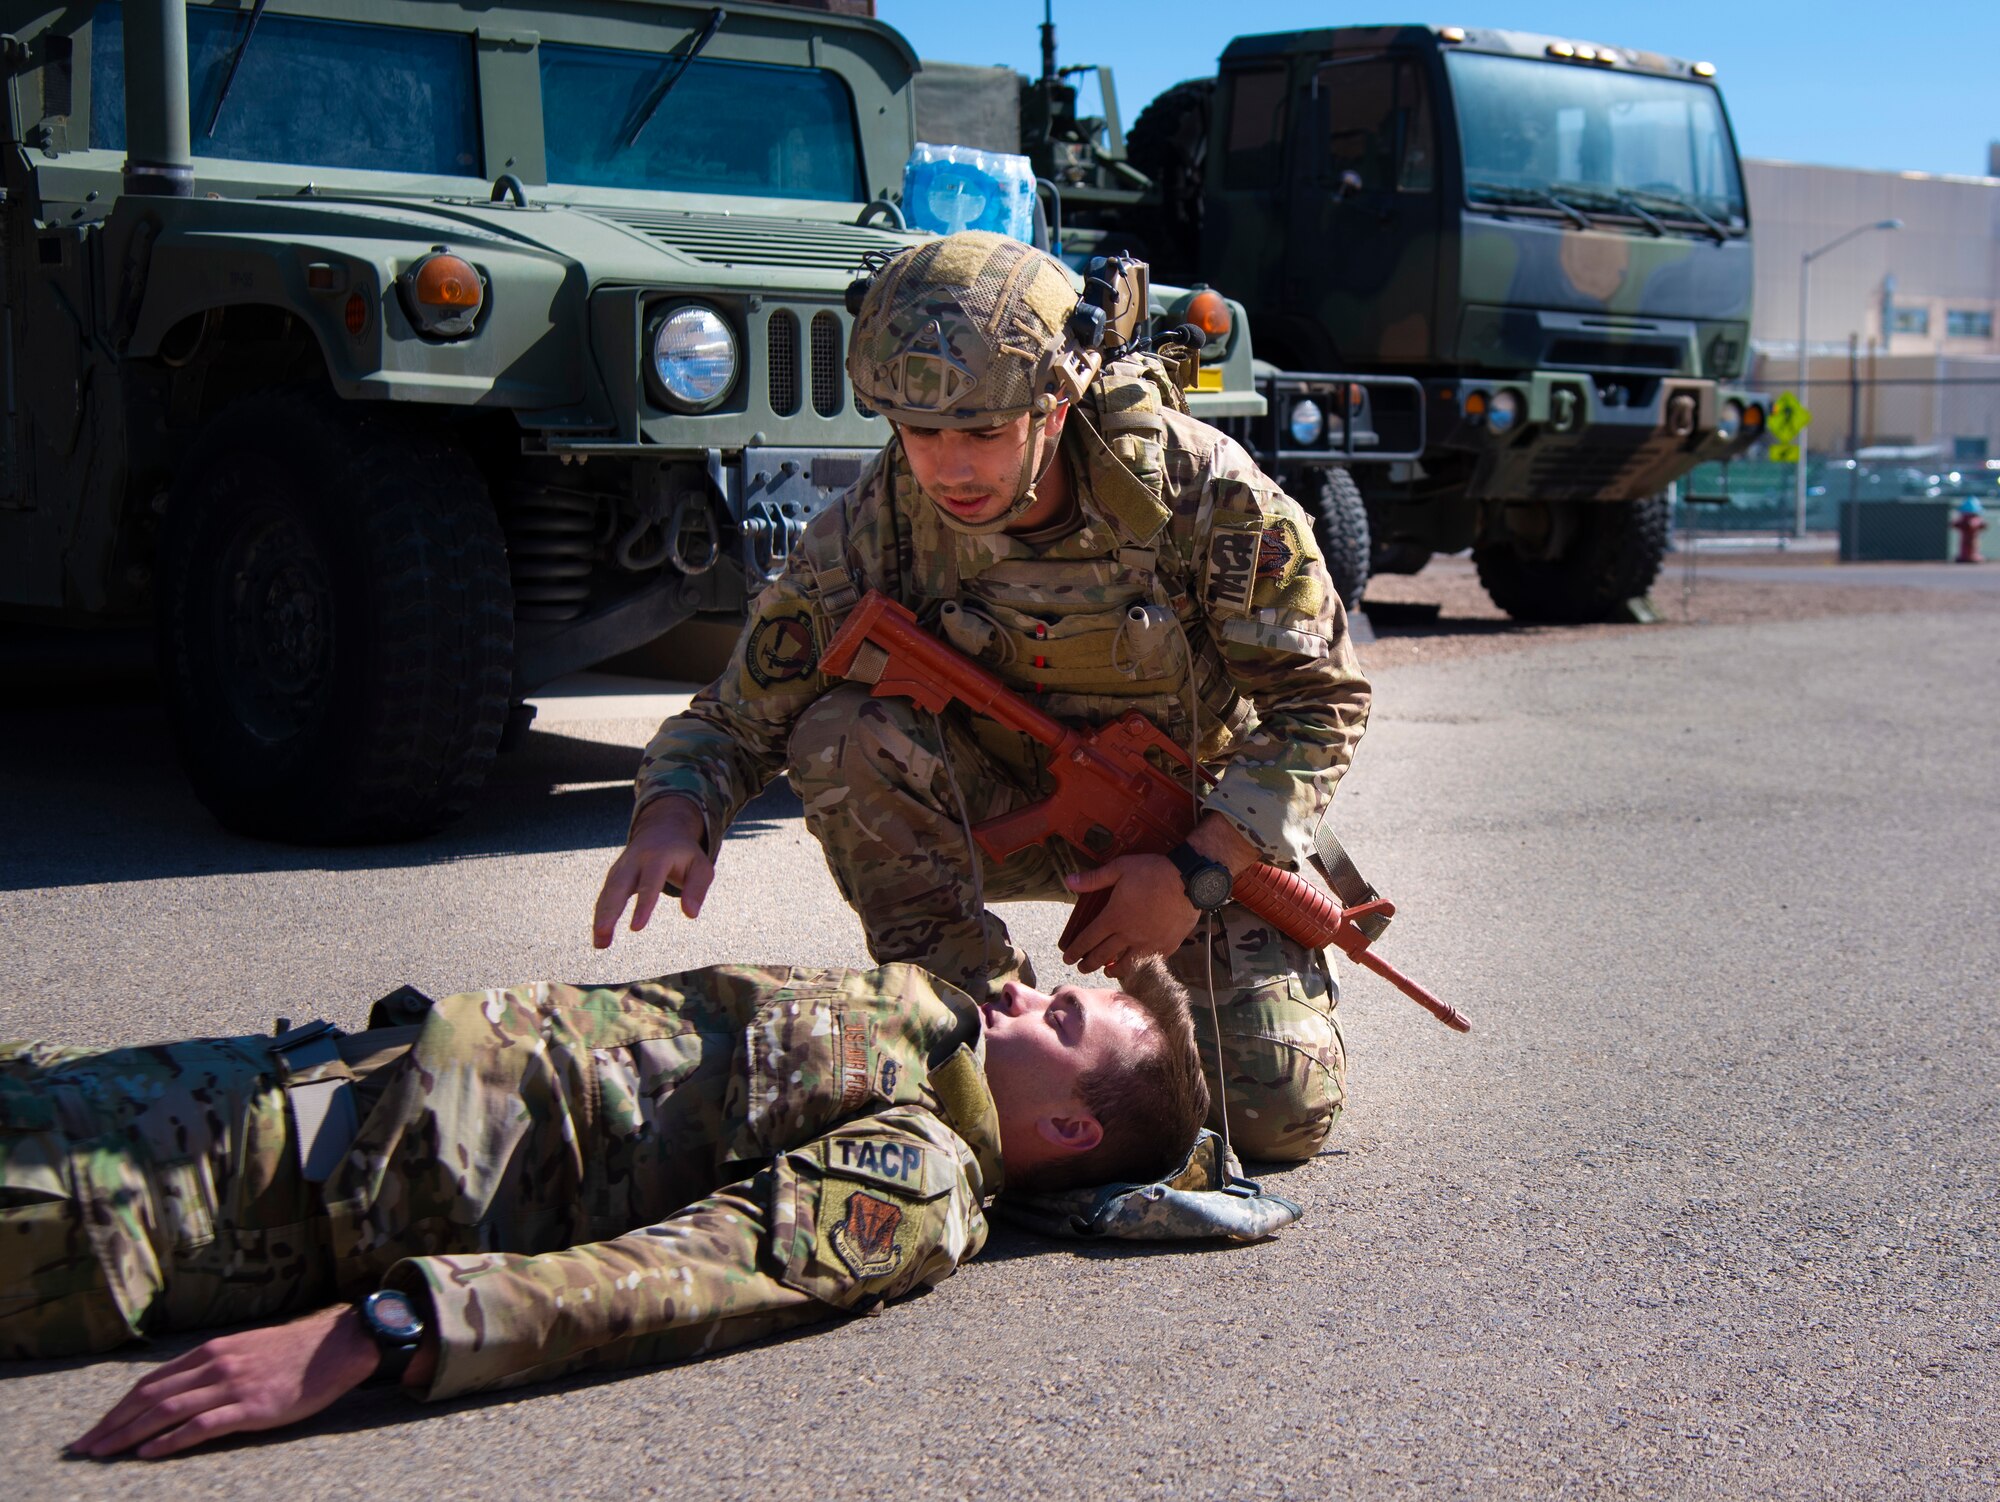 A U.S. Air Force Tactical Air Control Party specialist tends to a simulated casualty during a combat lifesaver skills scenario at the 2021 Wraith Challenge, April 23, 2021, on Fort Bliss, Texas. Participants were tested on their ability to analyze a situation, perform emergency aid, and bring victims to safety until more trained medical units could arrive. (U.S. Air Force photo by Airman 1st Class Jessica Sanchez)